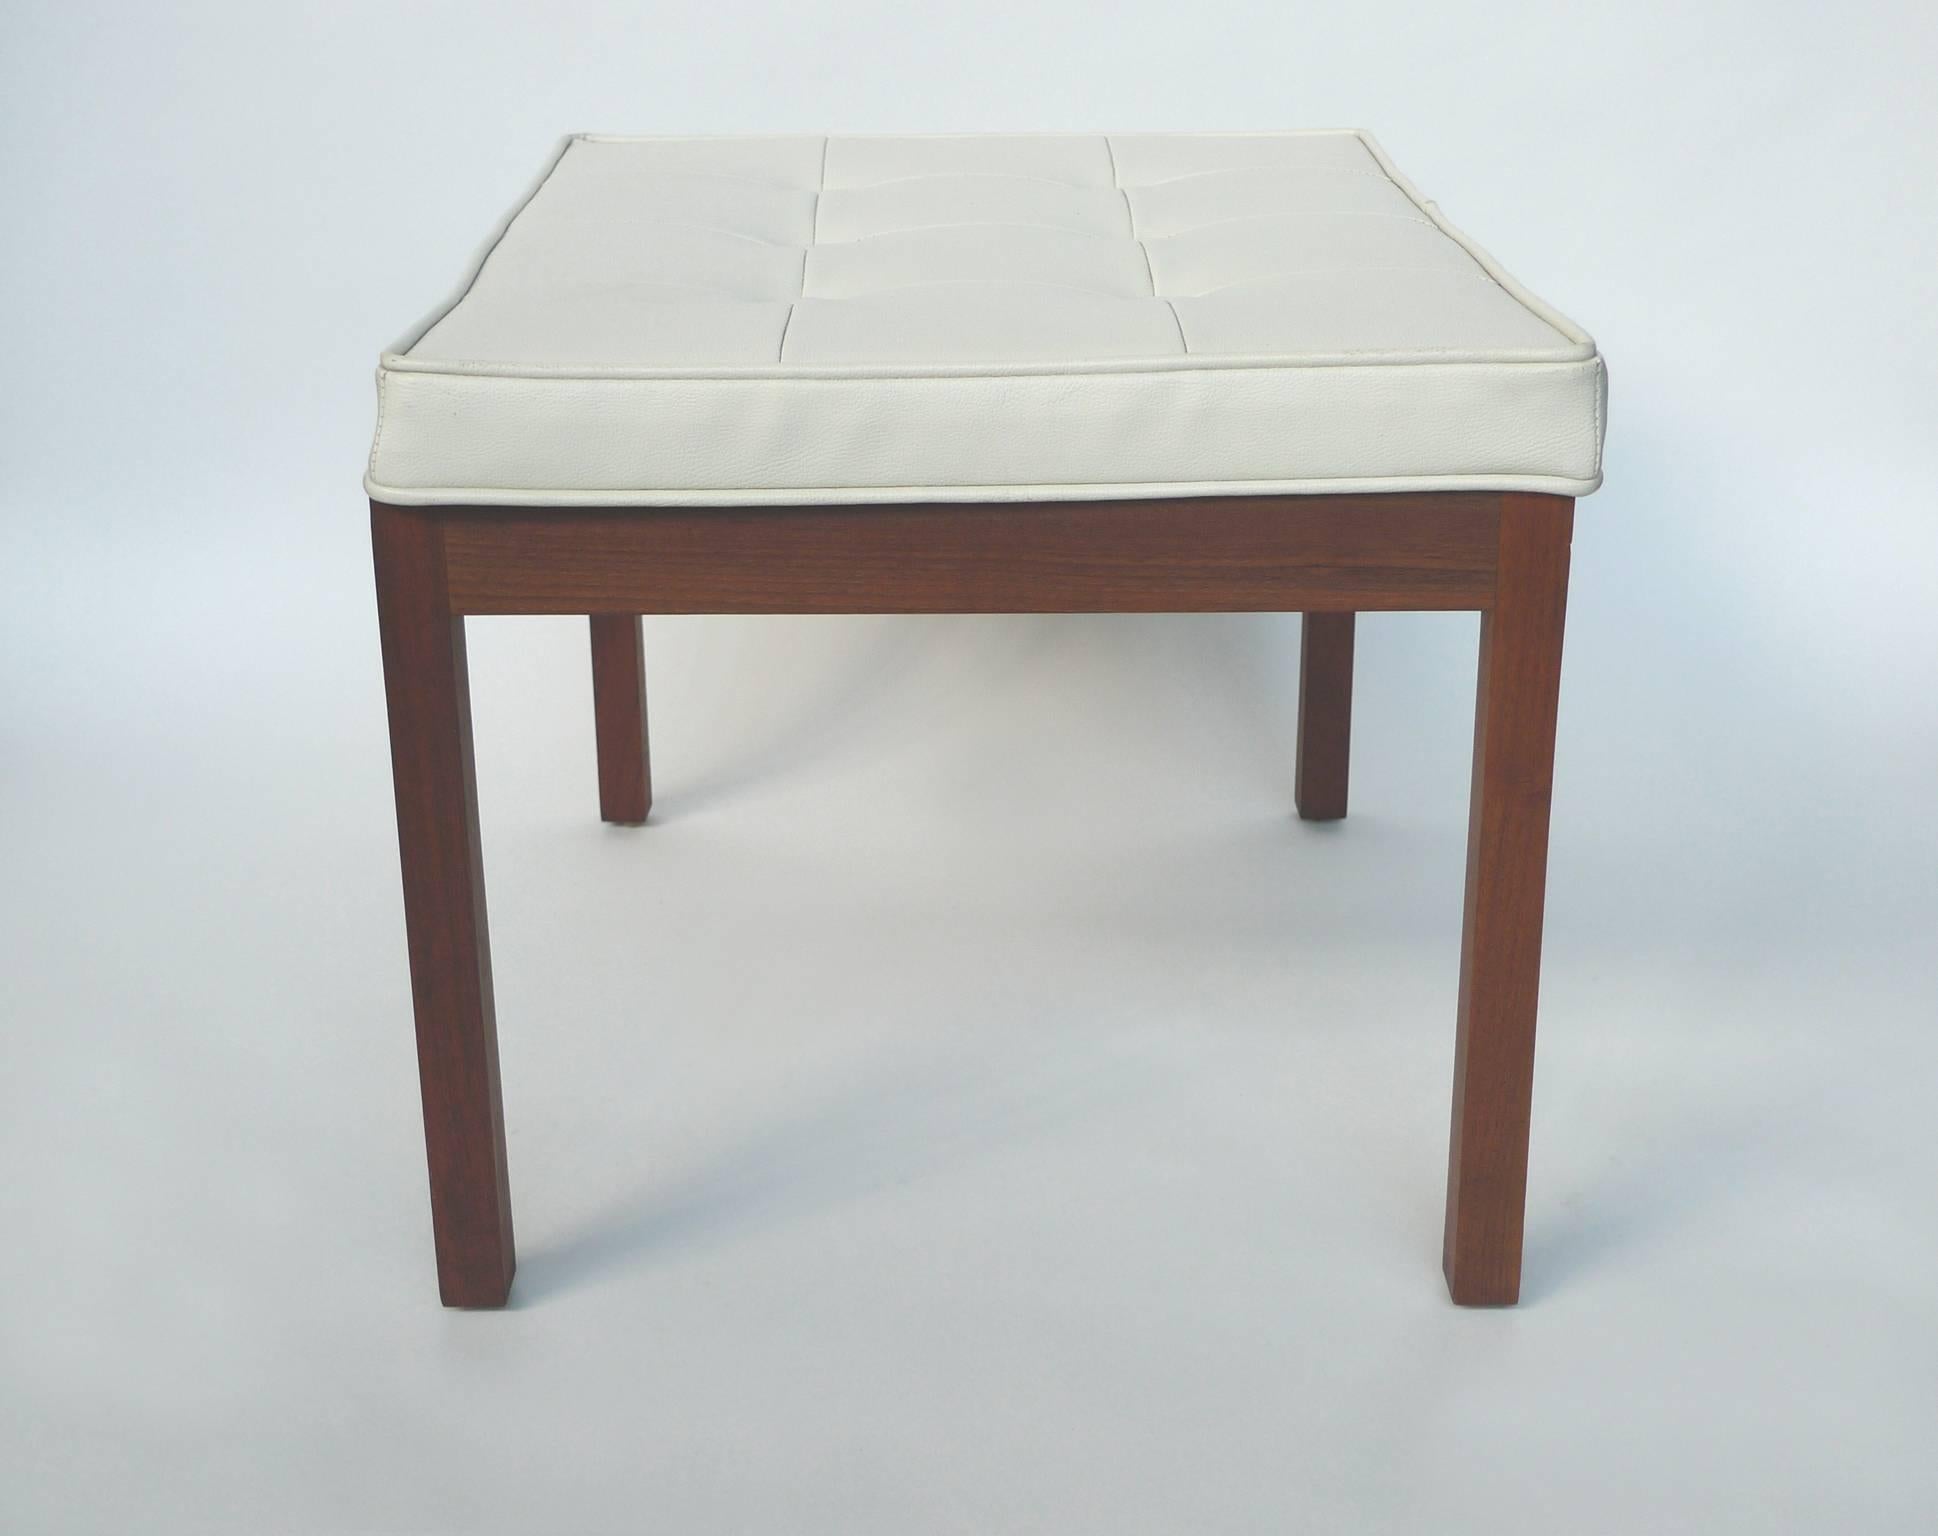 American 1960s White Vinyl Tufted Bench by Hibriten Chair Co